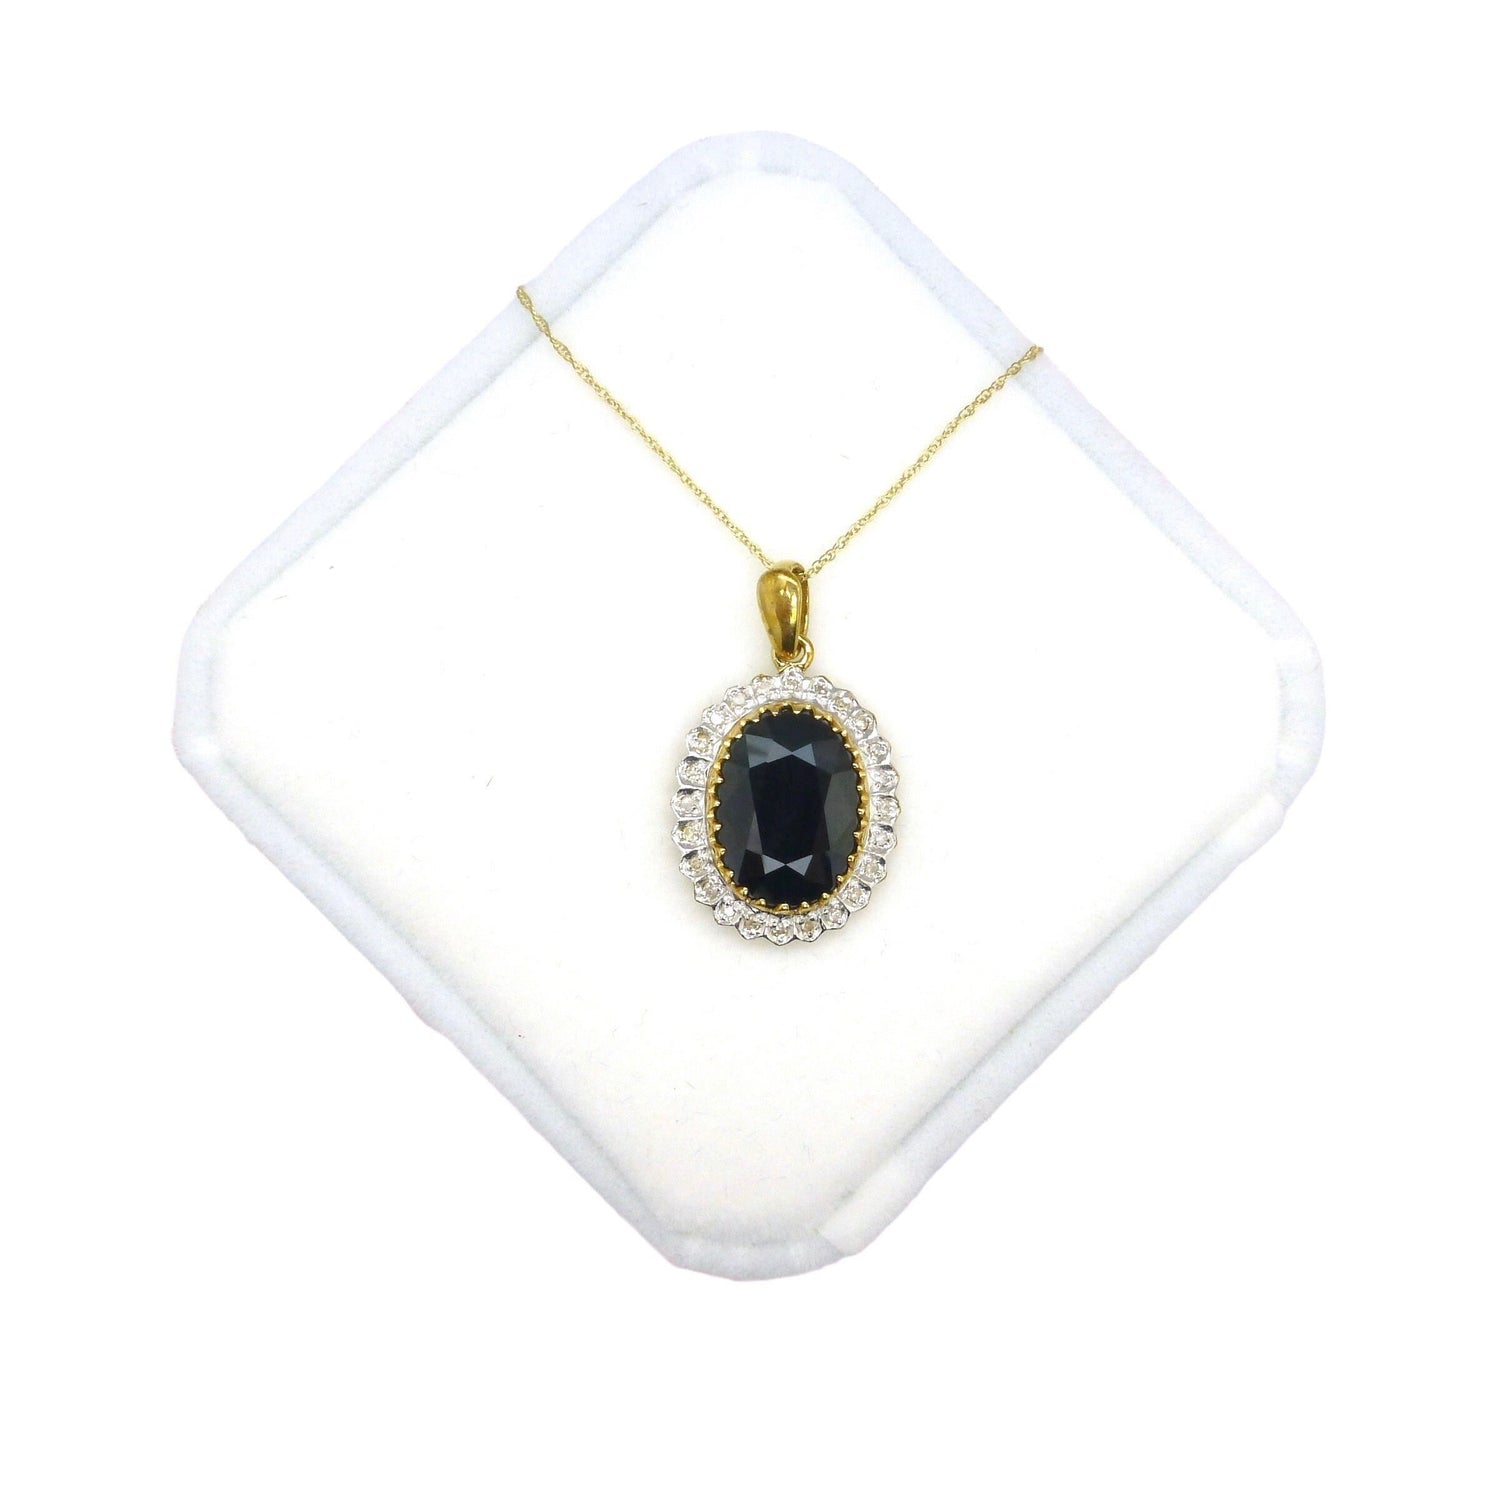 Vintage large oval black sapphire pendant surrounded by tiny diamonds suspended on a fine gold chain.